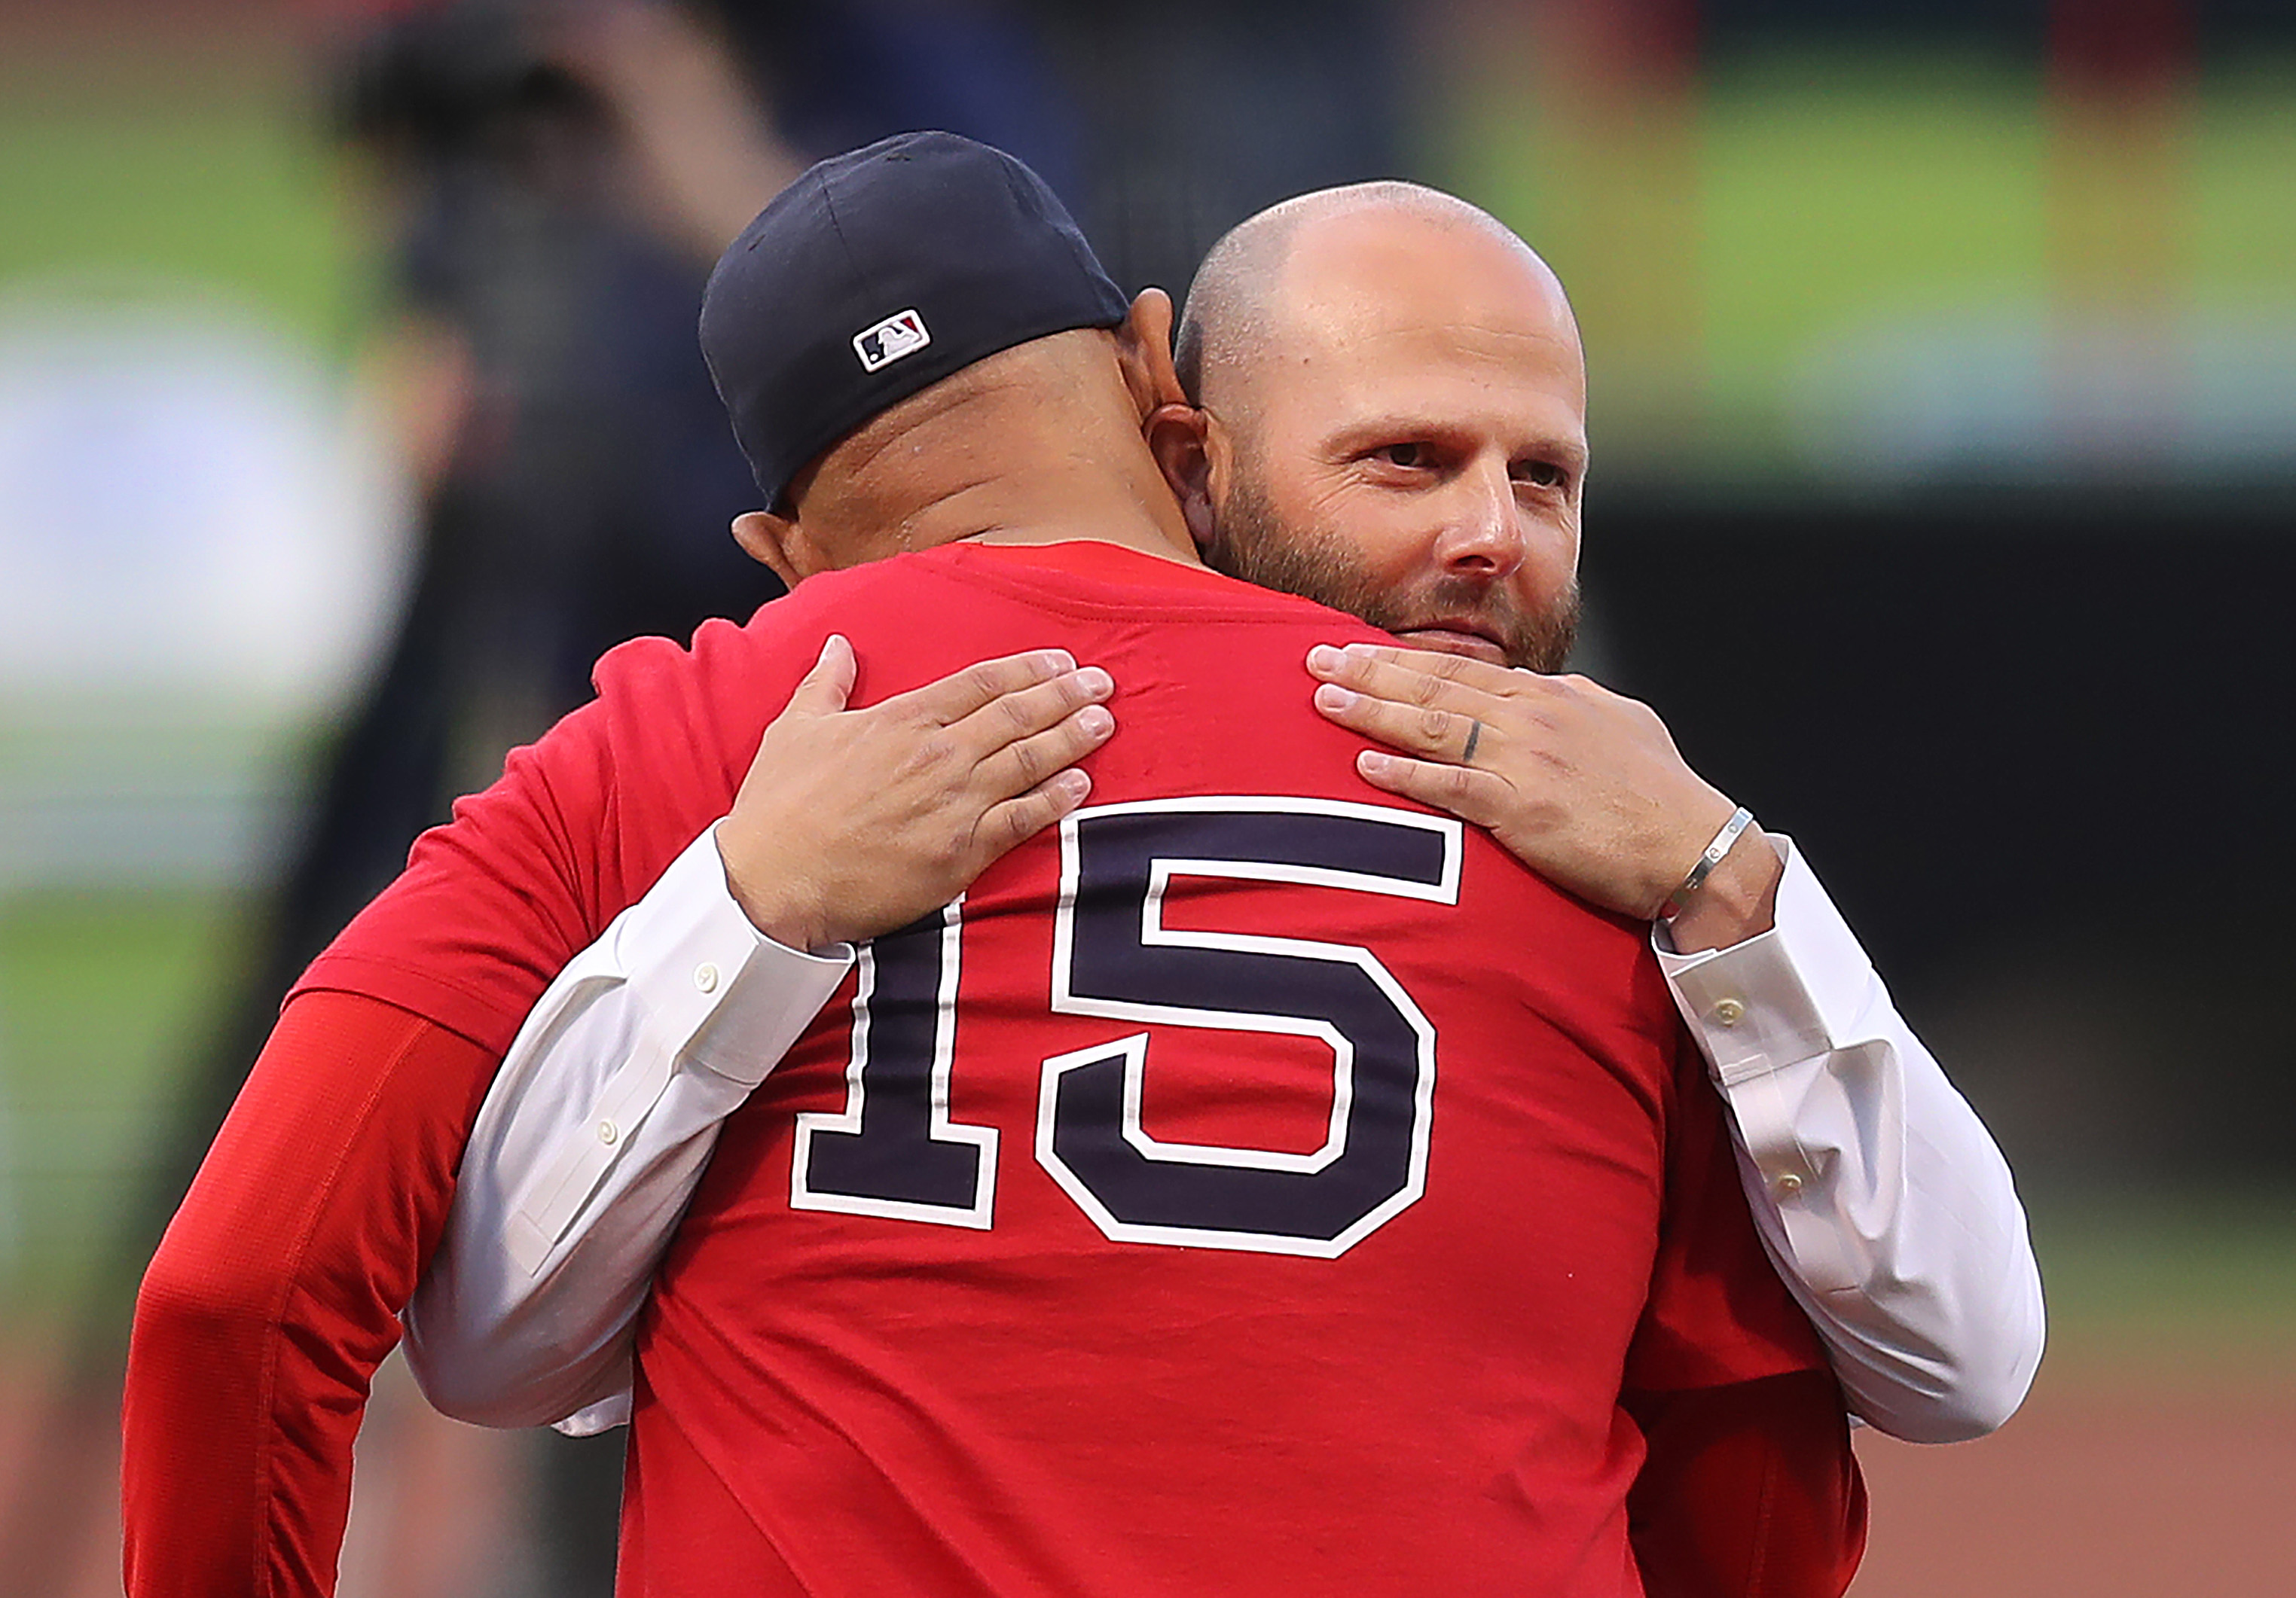 Dustin Pedroia To Be Inducted Into To Red Sox Hall Of Fame's 2022 Class